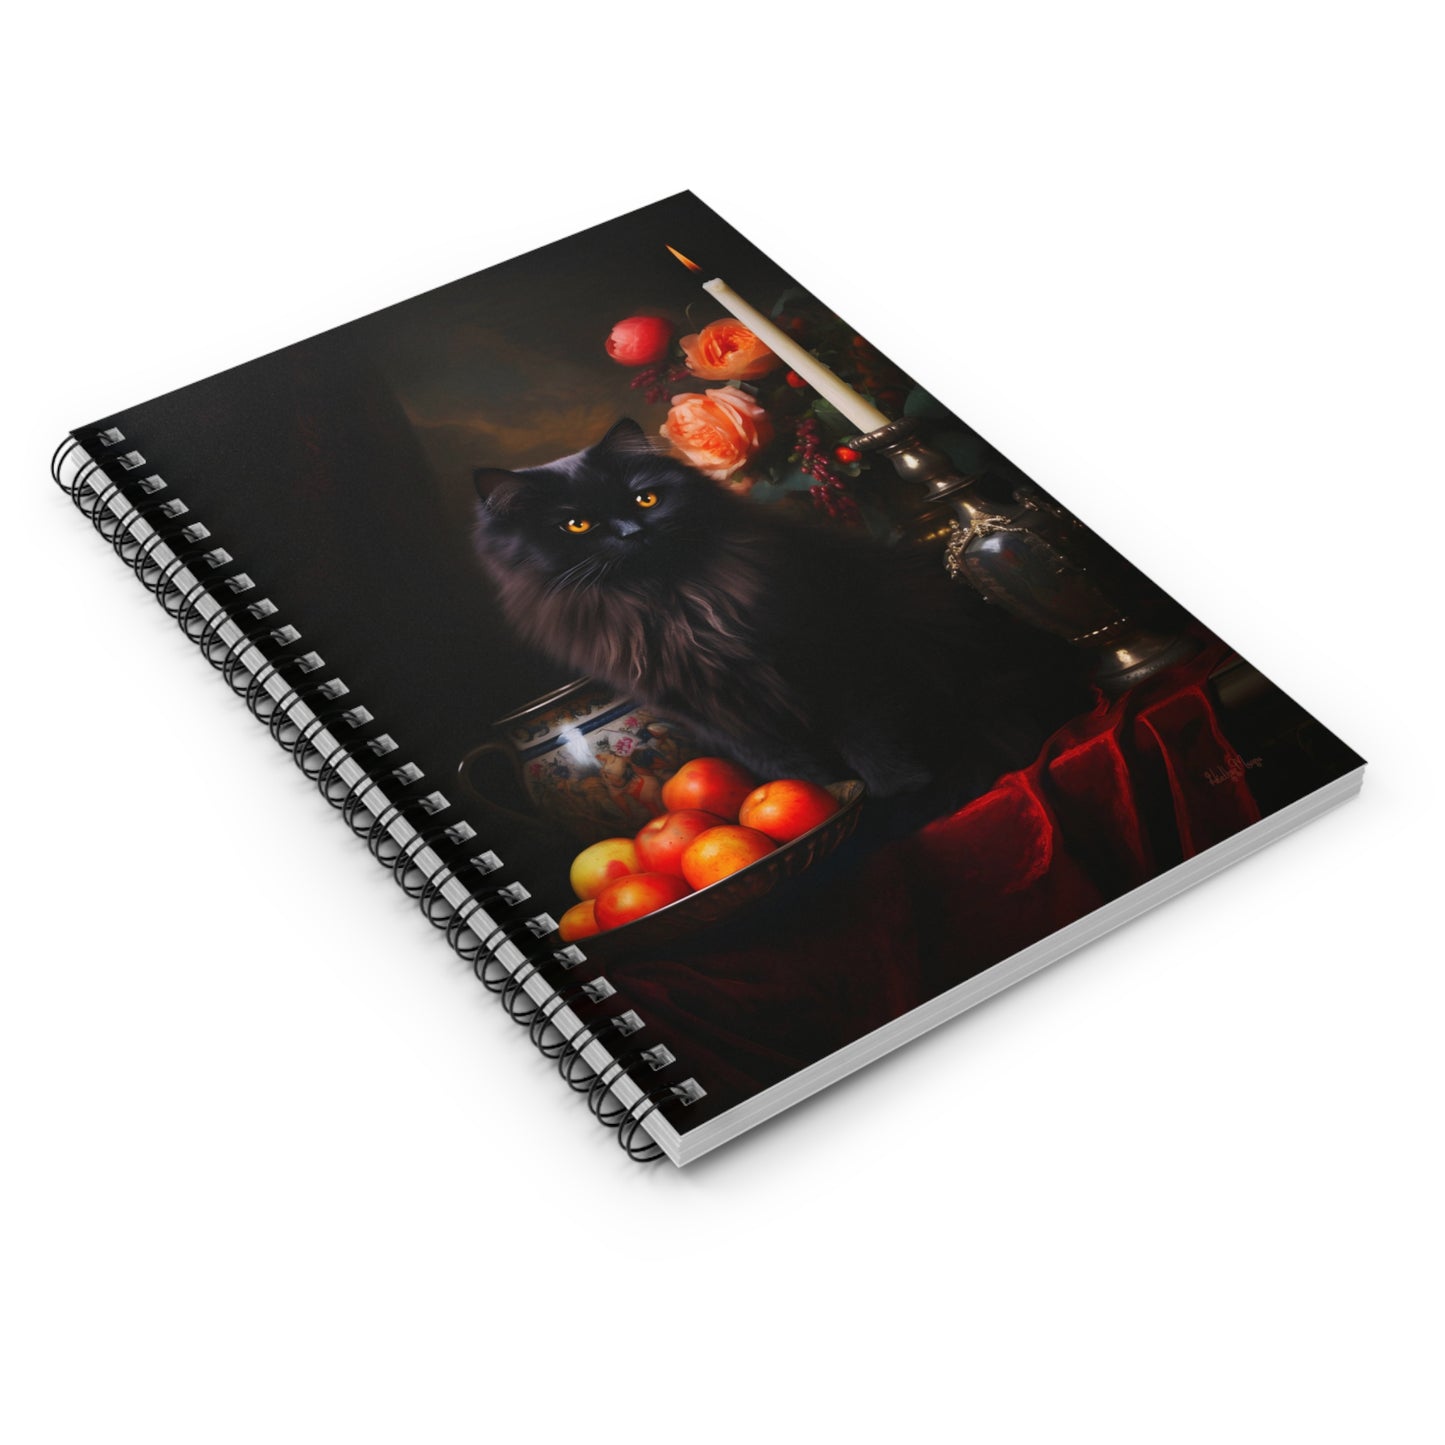 Black Persian with Fruit and Flowers | Ruled Line Spiral Notebook